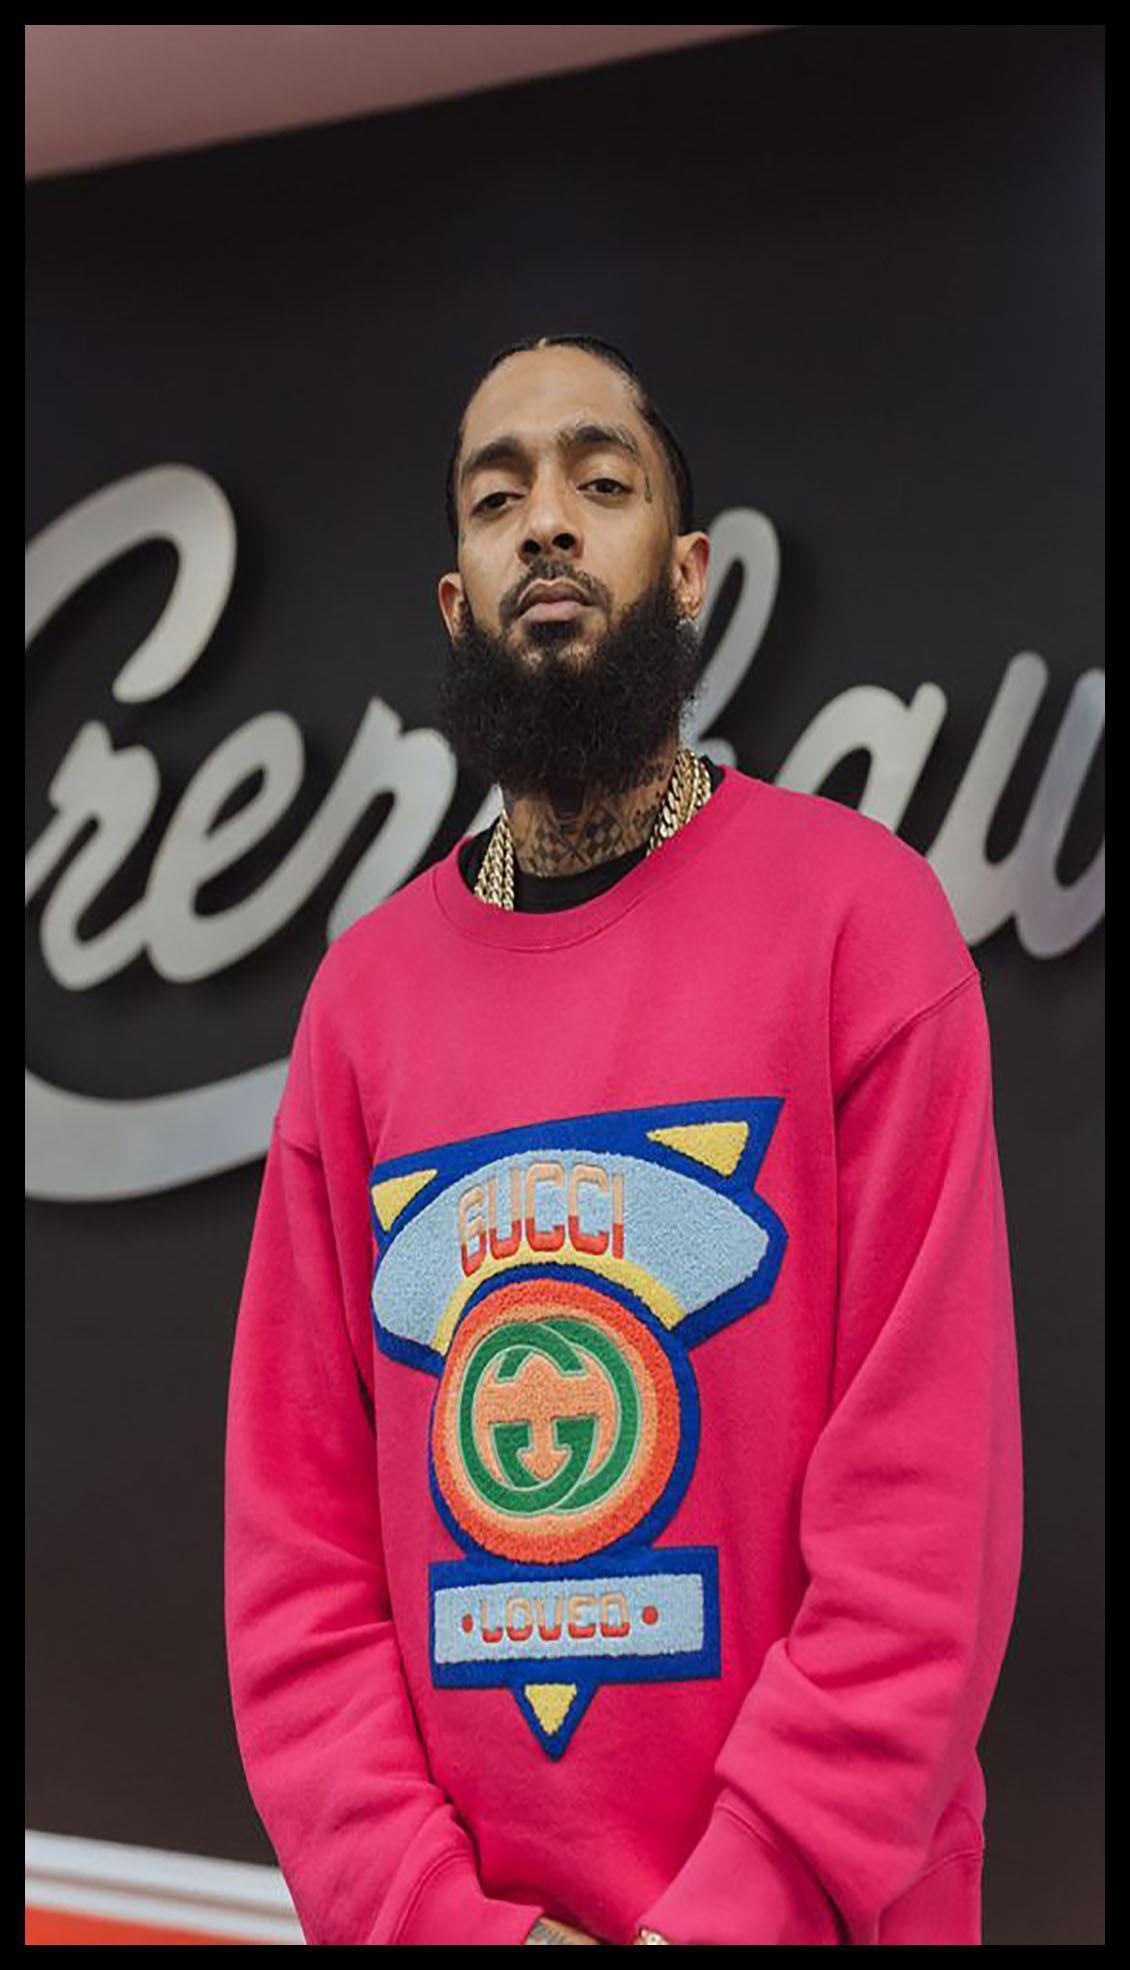 Nipsey Hussle HD Wallpaper 2019 for Android